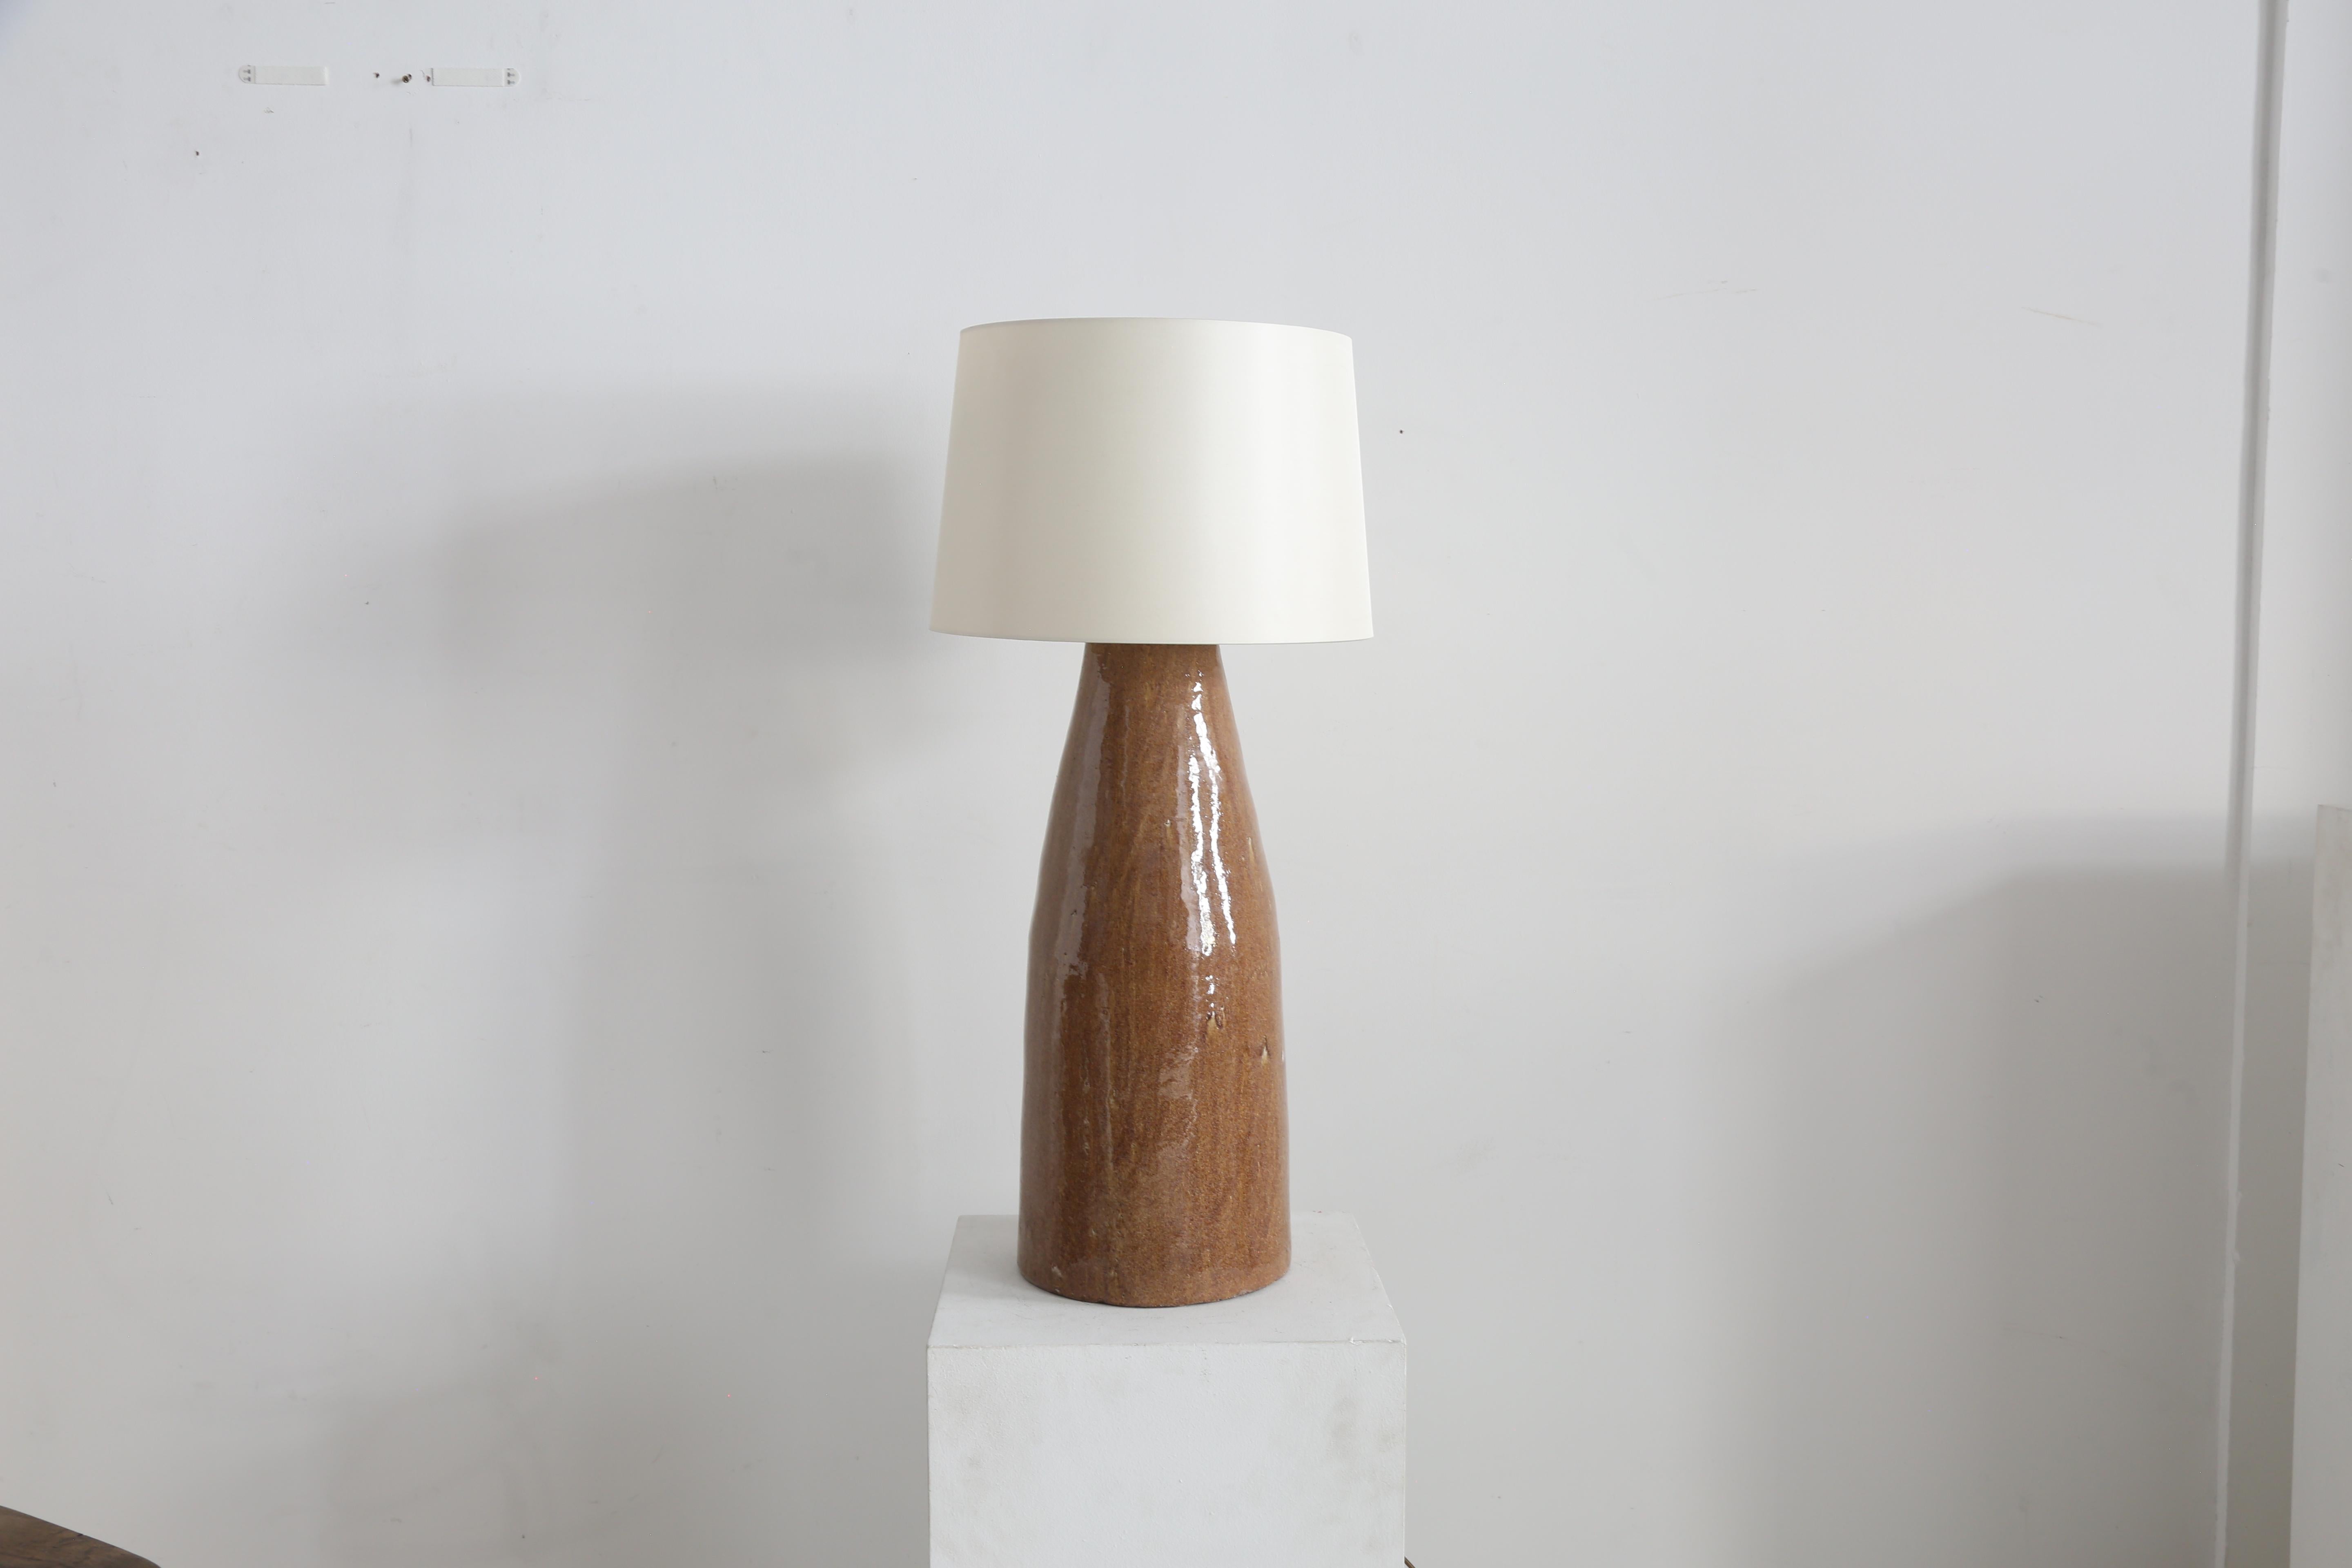 Heavy set oversized hand crafted ceramic lamp. 

Opalescent earthy tone glaze throughout. 

France 1970s.

H 63cm x D 26cm (without shade)